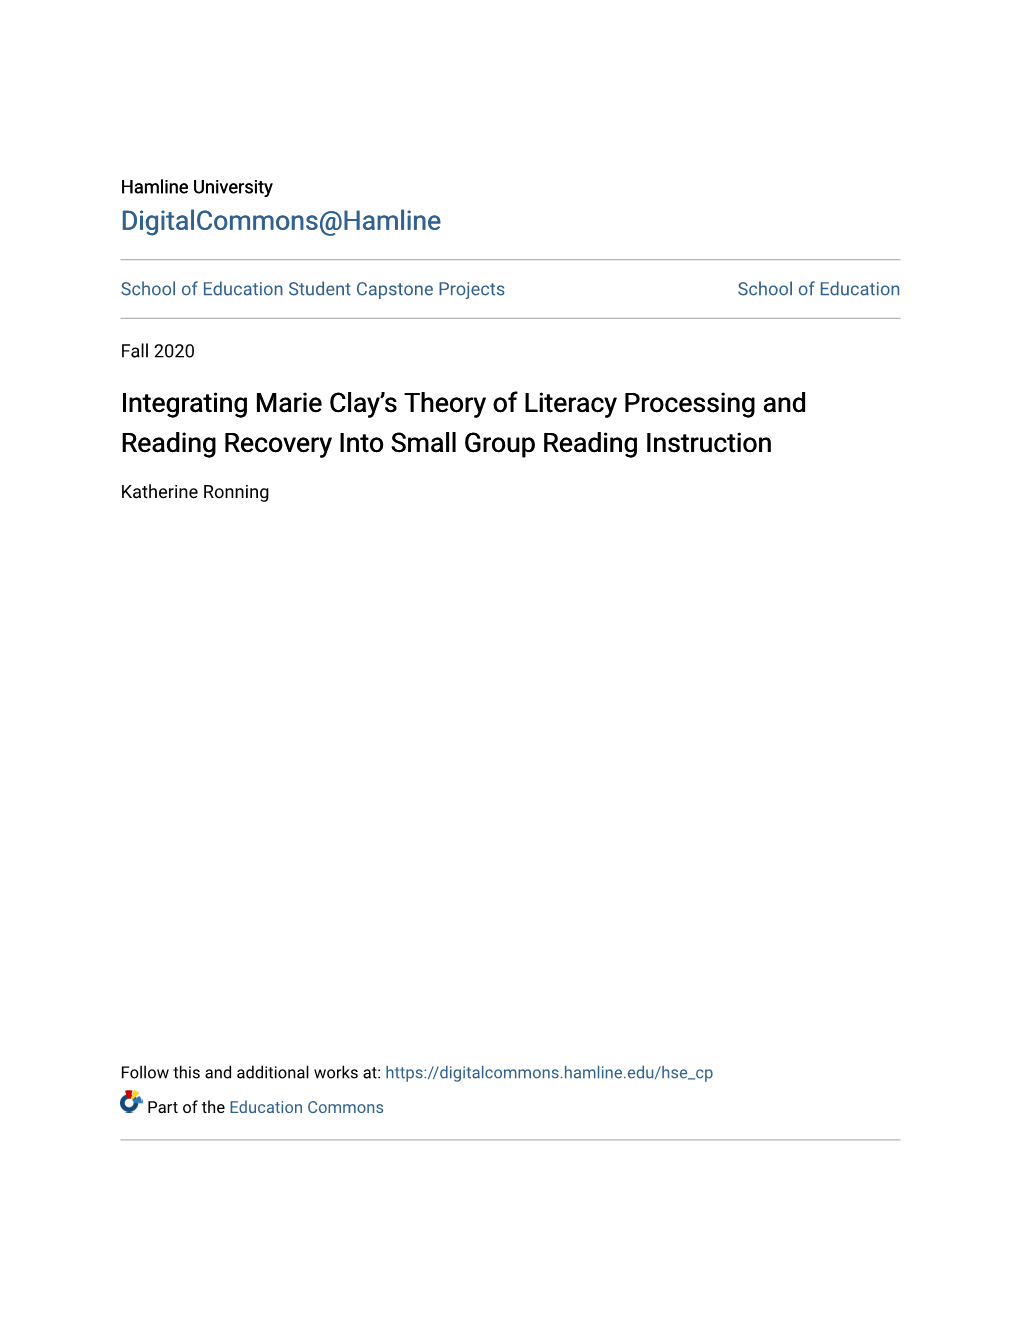 Integrating Marie Clay's Theory of Literacy Processing and Reading